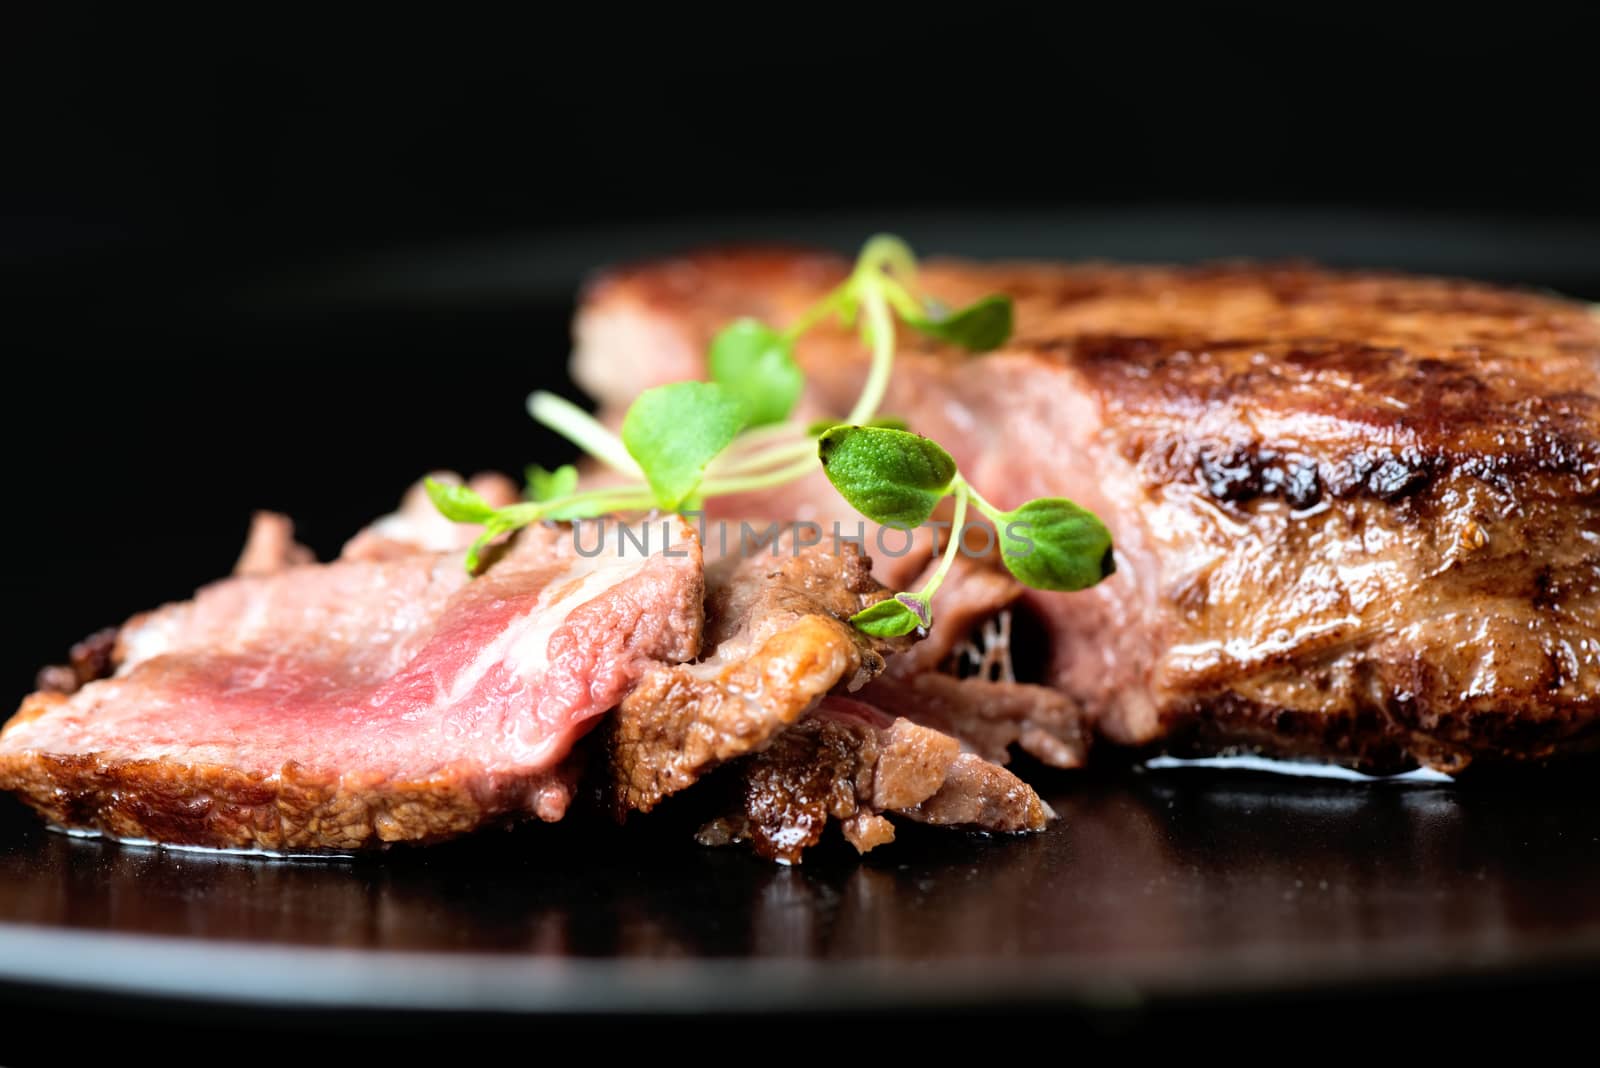 Delicious beef steak on a plate, close-up